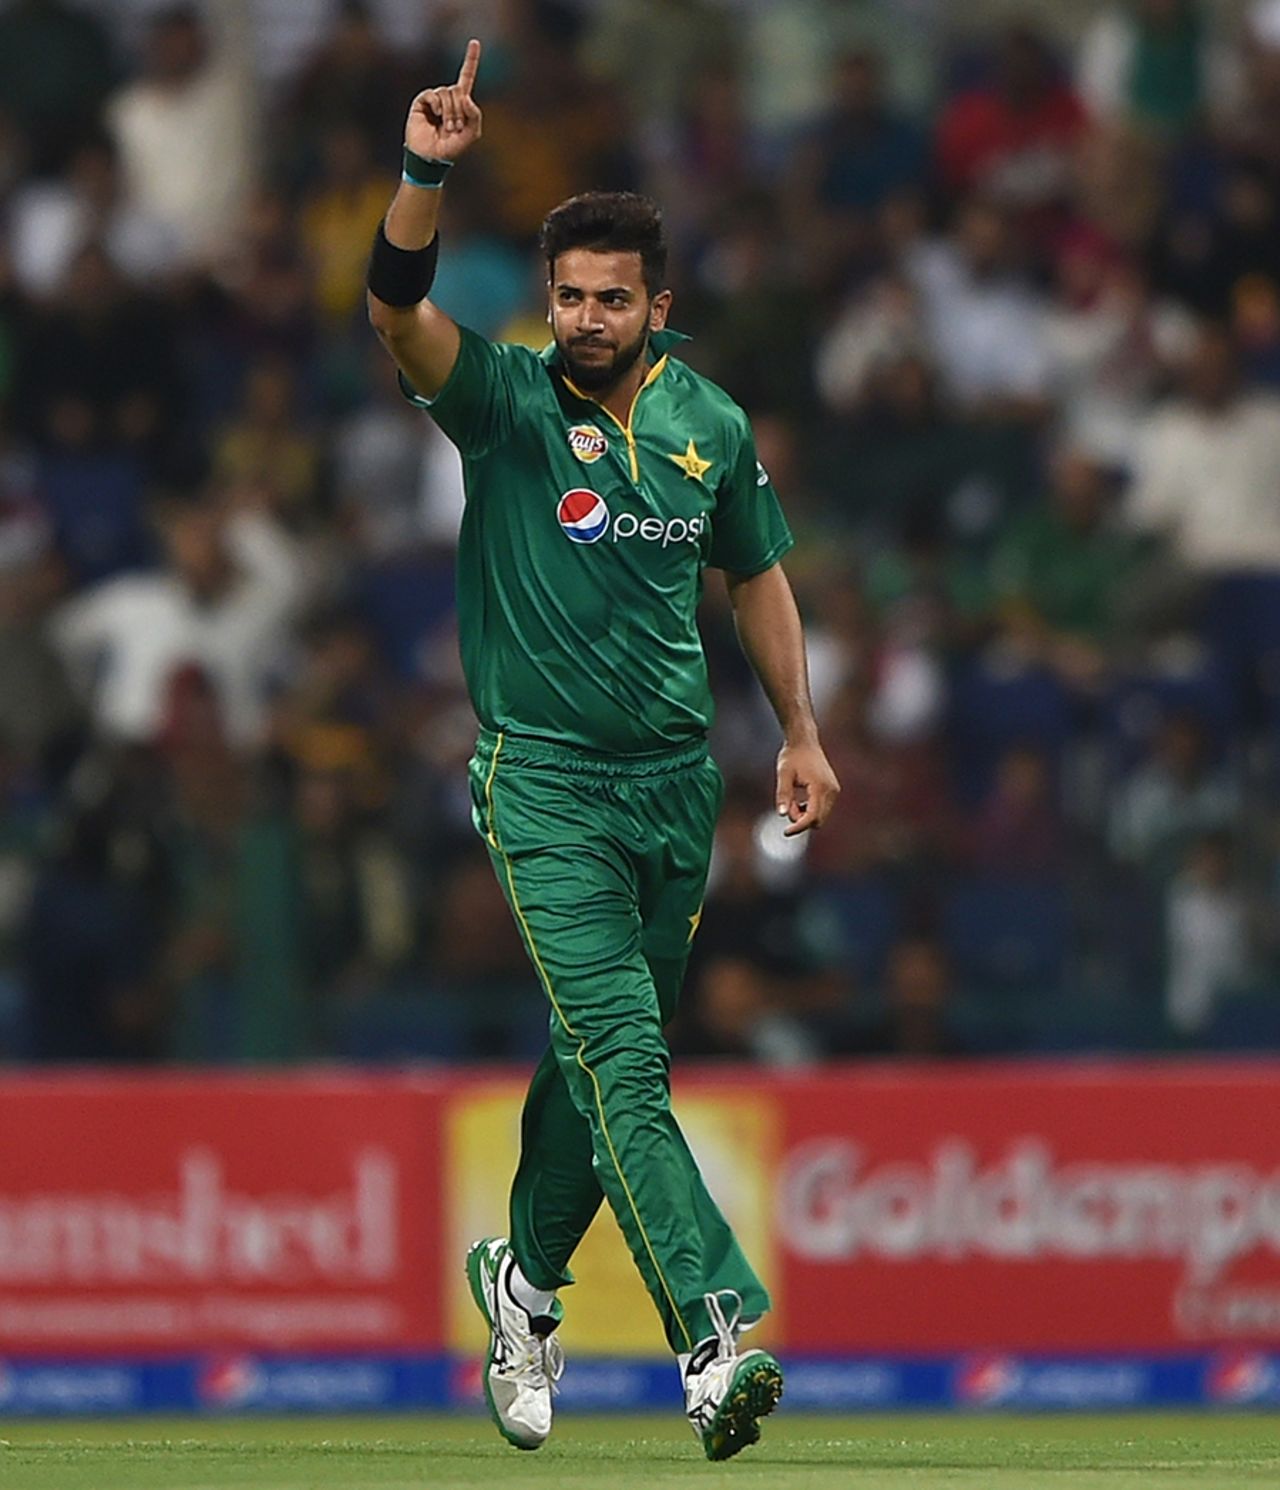 Imad Wasim celebrates after taking a wicket, Pakistan v West Indies, 3rd T20I, Abu Dhabi, September 27, 2016